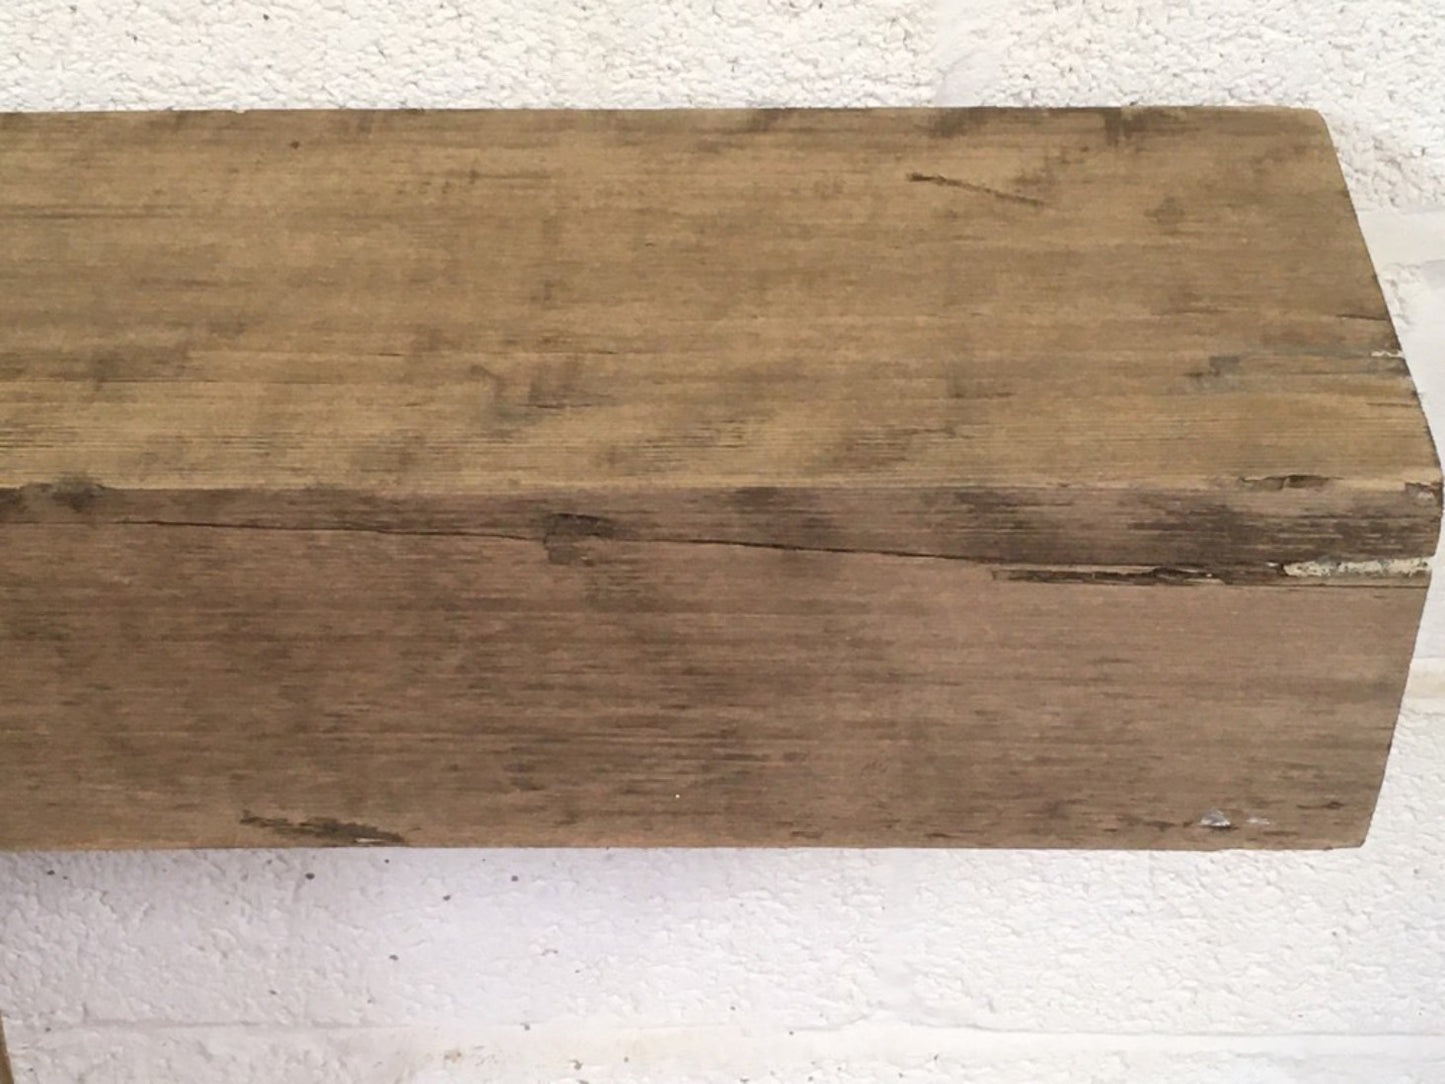 4ft 1 3/8" Or 1.26m By 9 3/4” By 6” Length Reclaimed Old Chunky Pine Beam